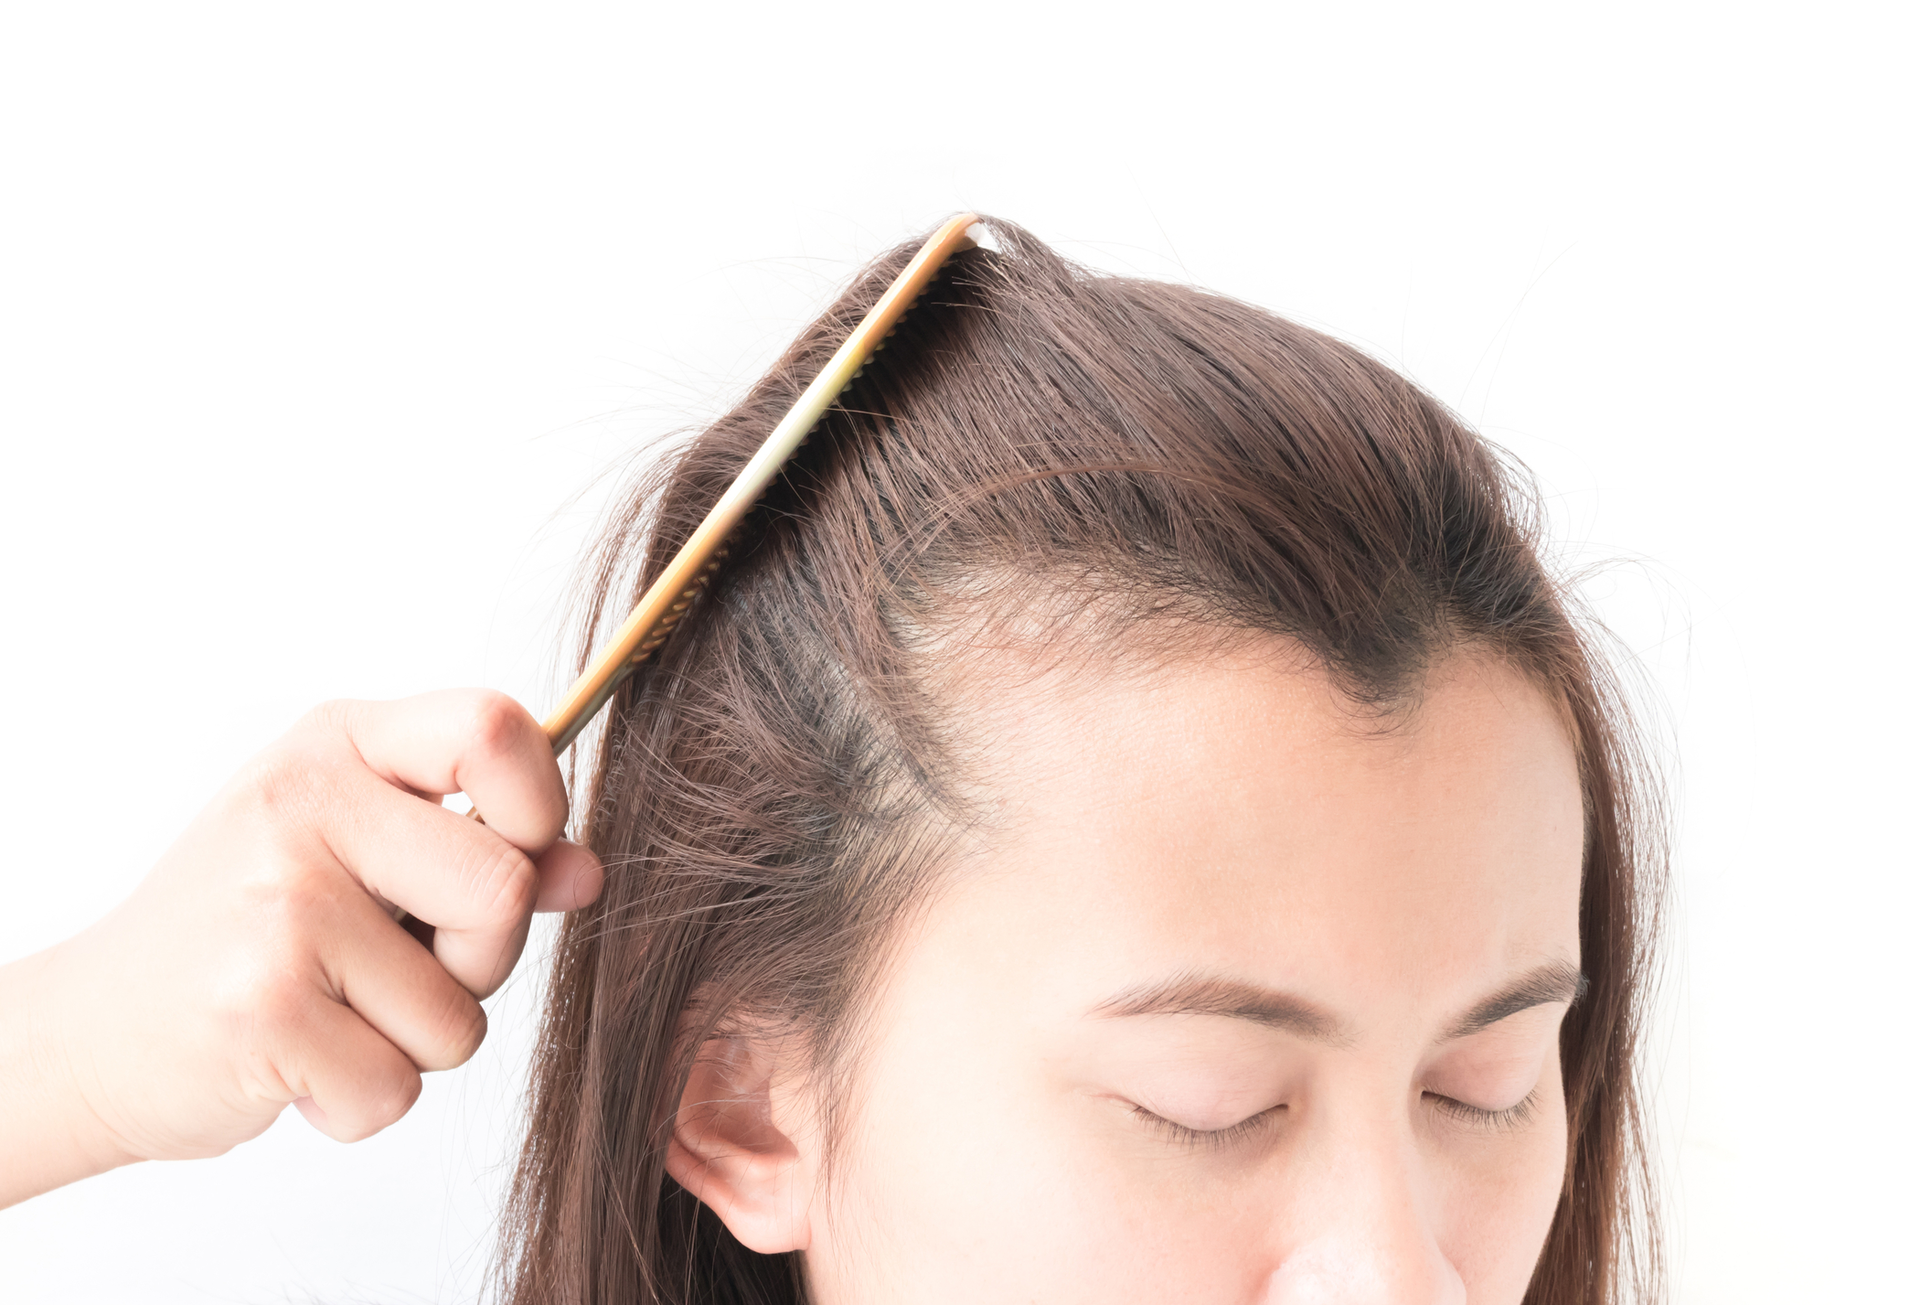 Does Vitamin D Deficiency Lead to Hair Loss? | Discover Magazine